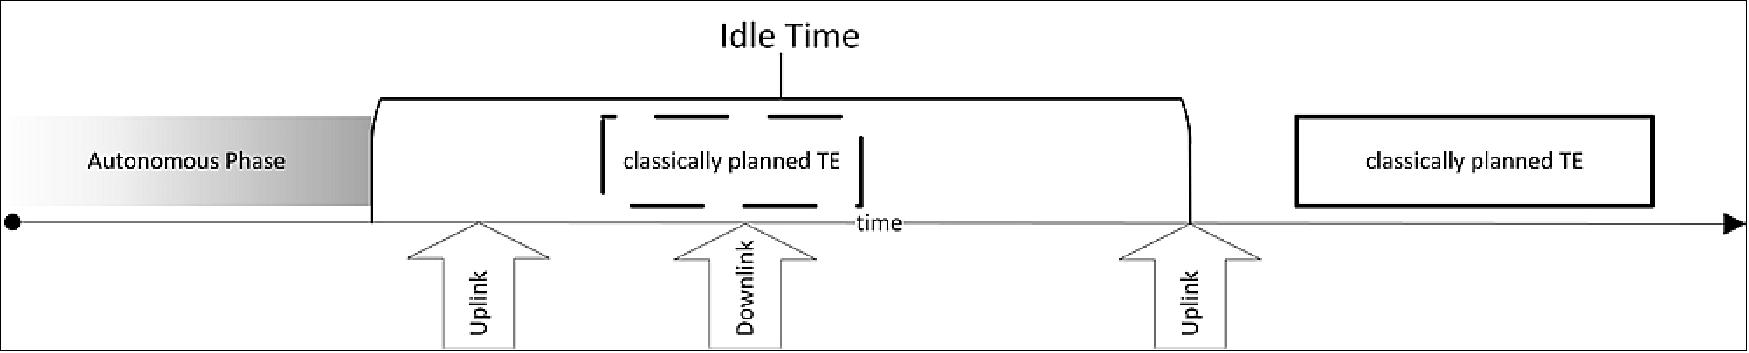 Figure 18: Illustration of the Safe Planning concept (adapted from [21]). The dashed classical planned timeline entry is disallowed as it is in the idle time. The first uplink opportunity cannot be used as it is before the first downlink opportunity (image credit: University of Wuerzburg)